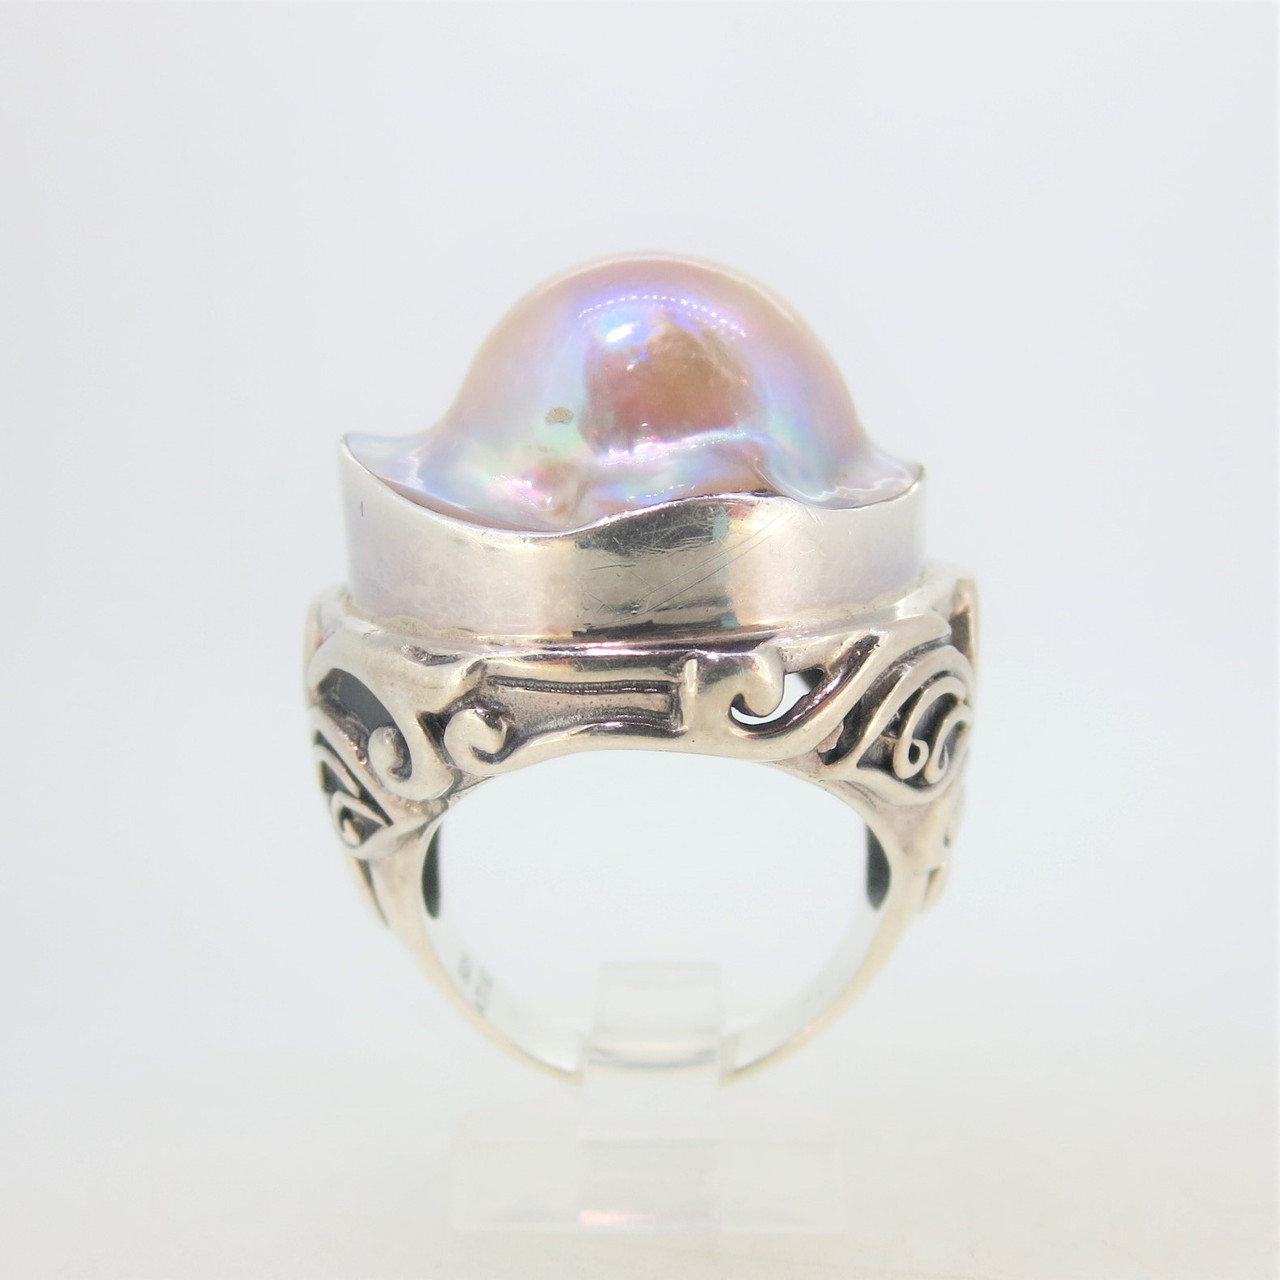 Authentic LOUIS VUITTON Speedy Pearl Ring Size:8.0(US) M68070